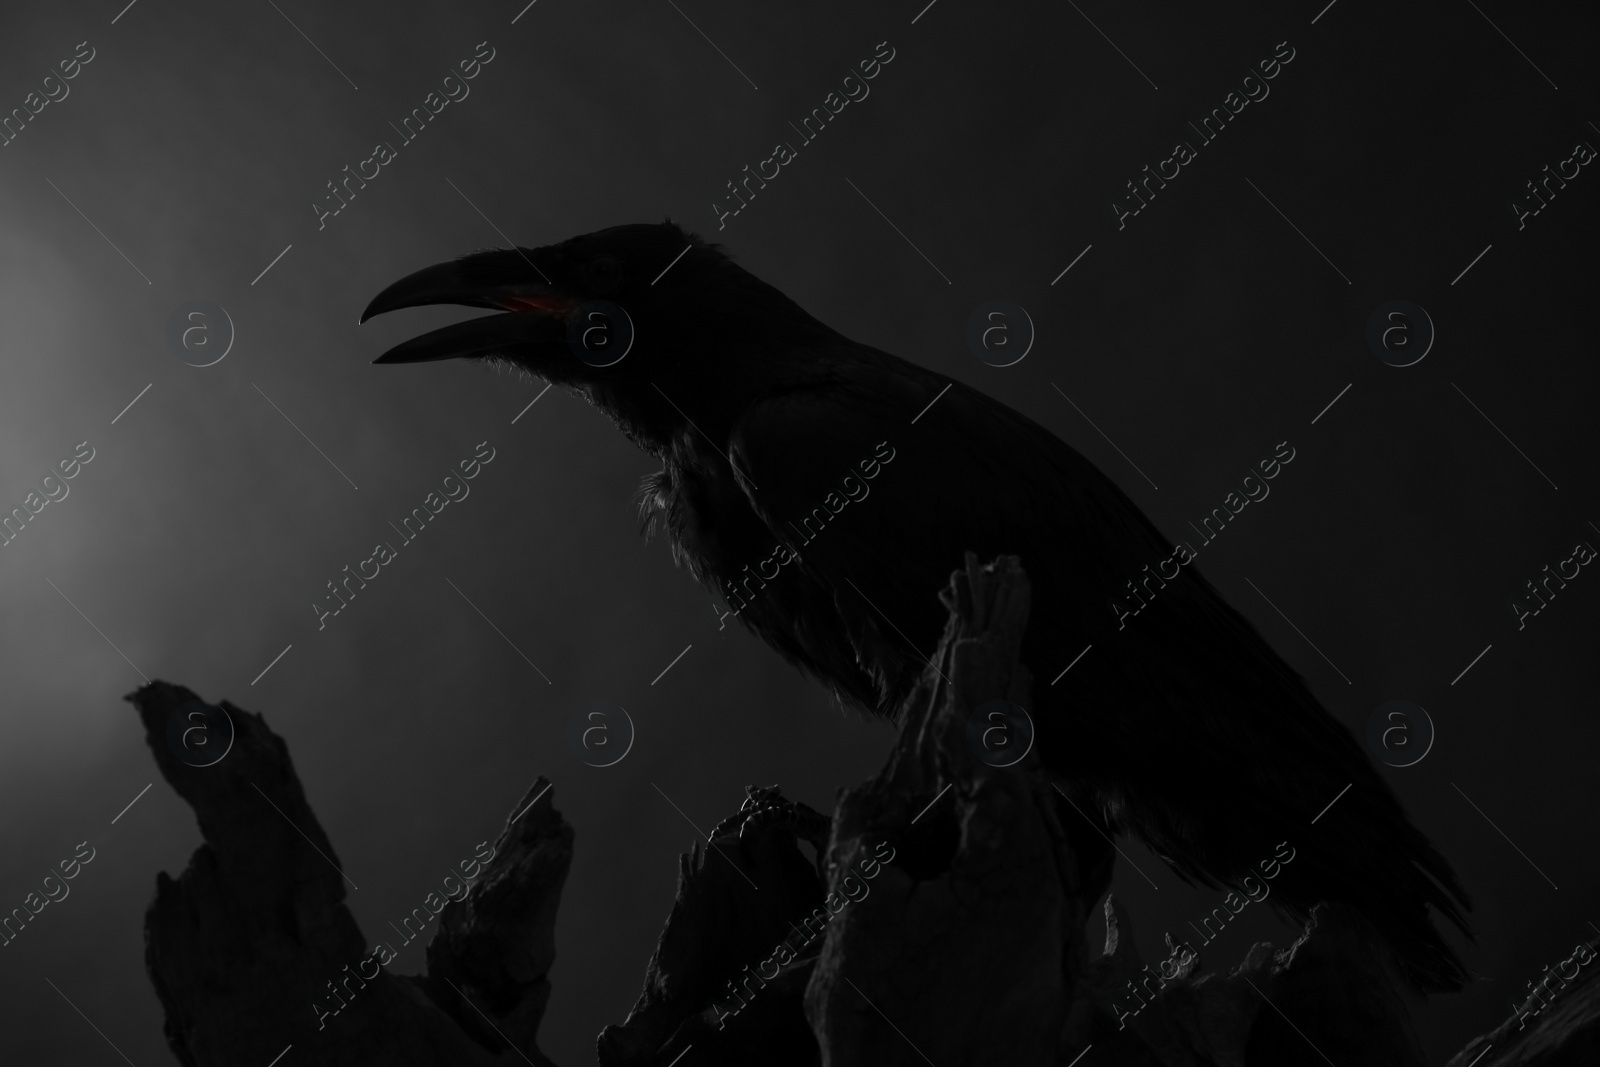 Photo of Silhouette of raven perched on wood against dark background